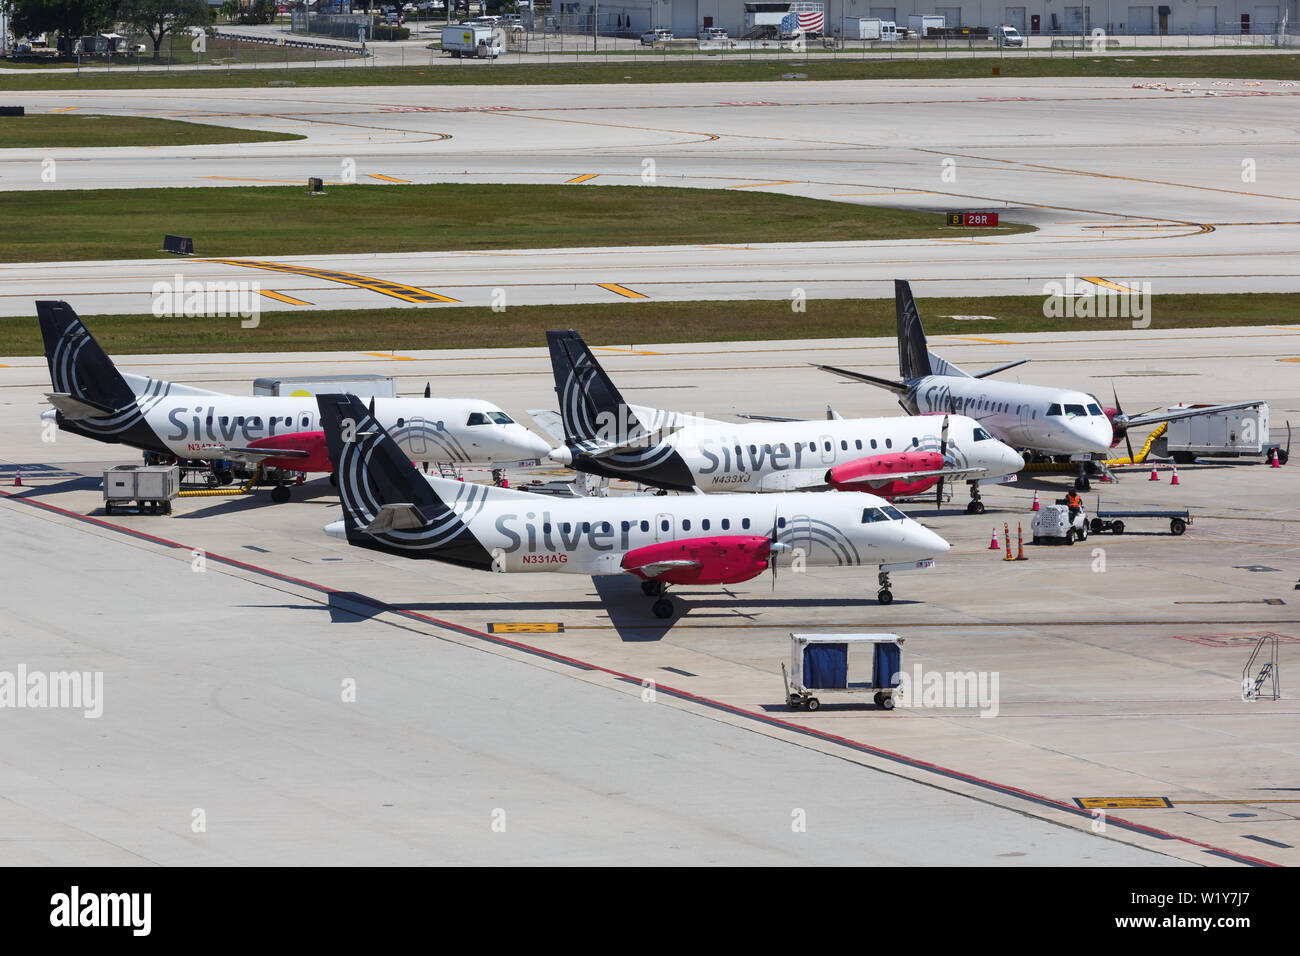 Fort Lauderdale, Florida – April 6, 2019: Silver Airways Saab 340 airplanes at Fort Lauderdale airport (FLL) in the United States. Stock Photo